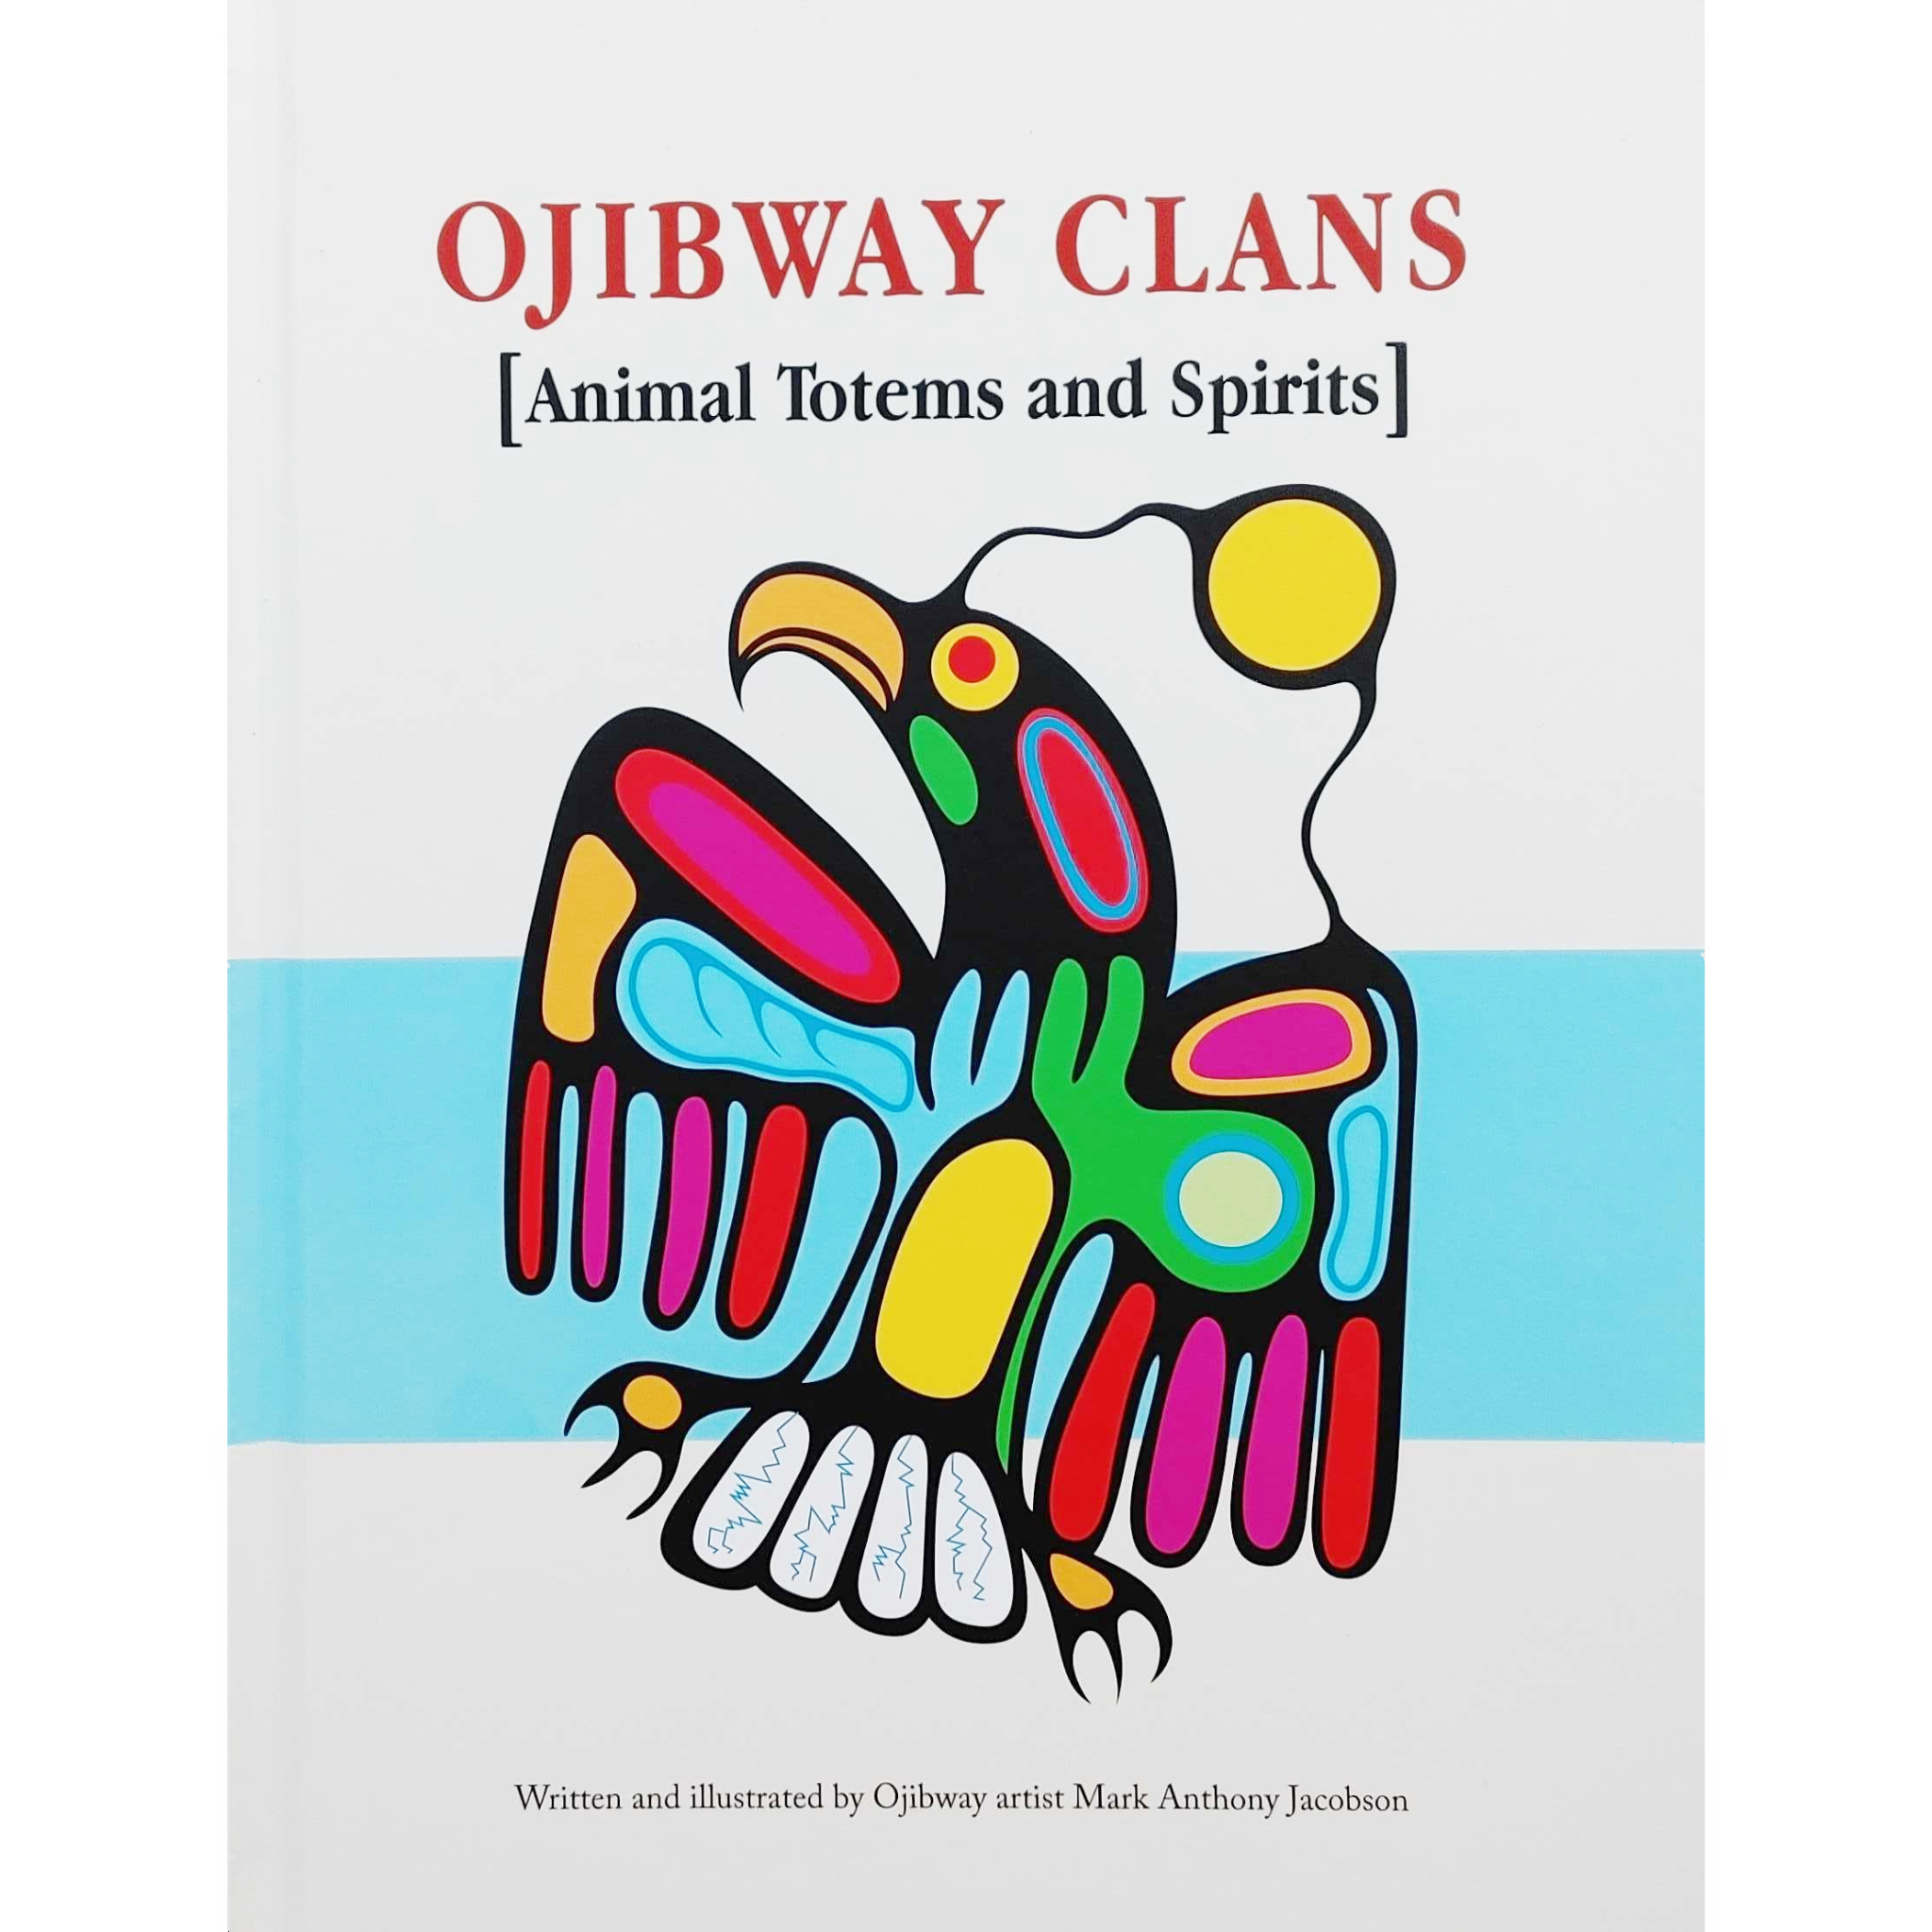 Native Northwest Ojibway Clans - Animal Totems and Spirits